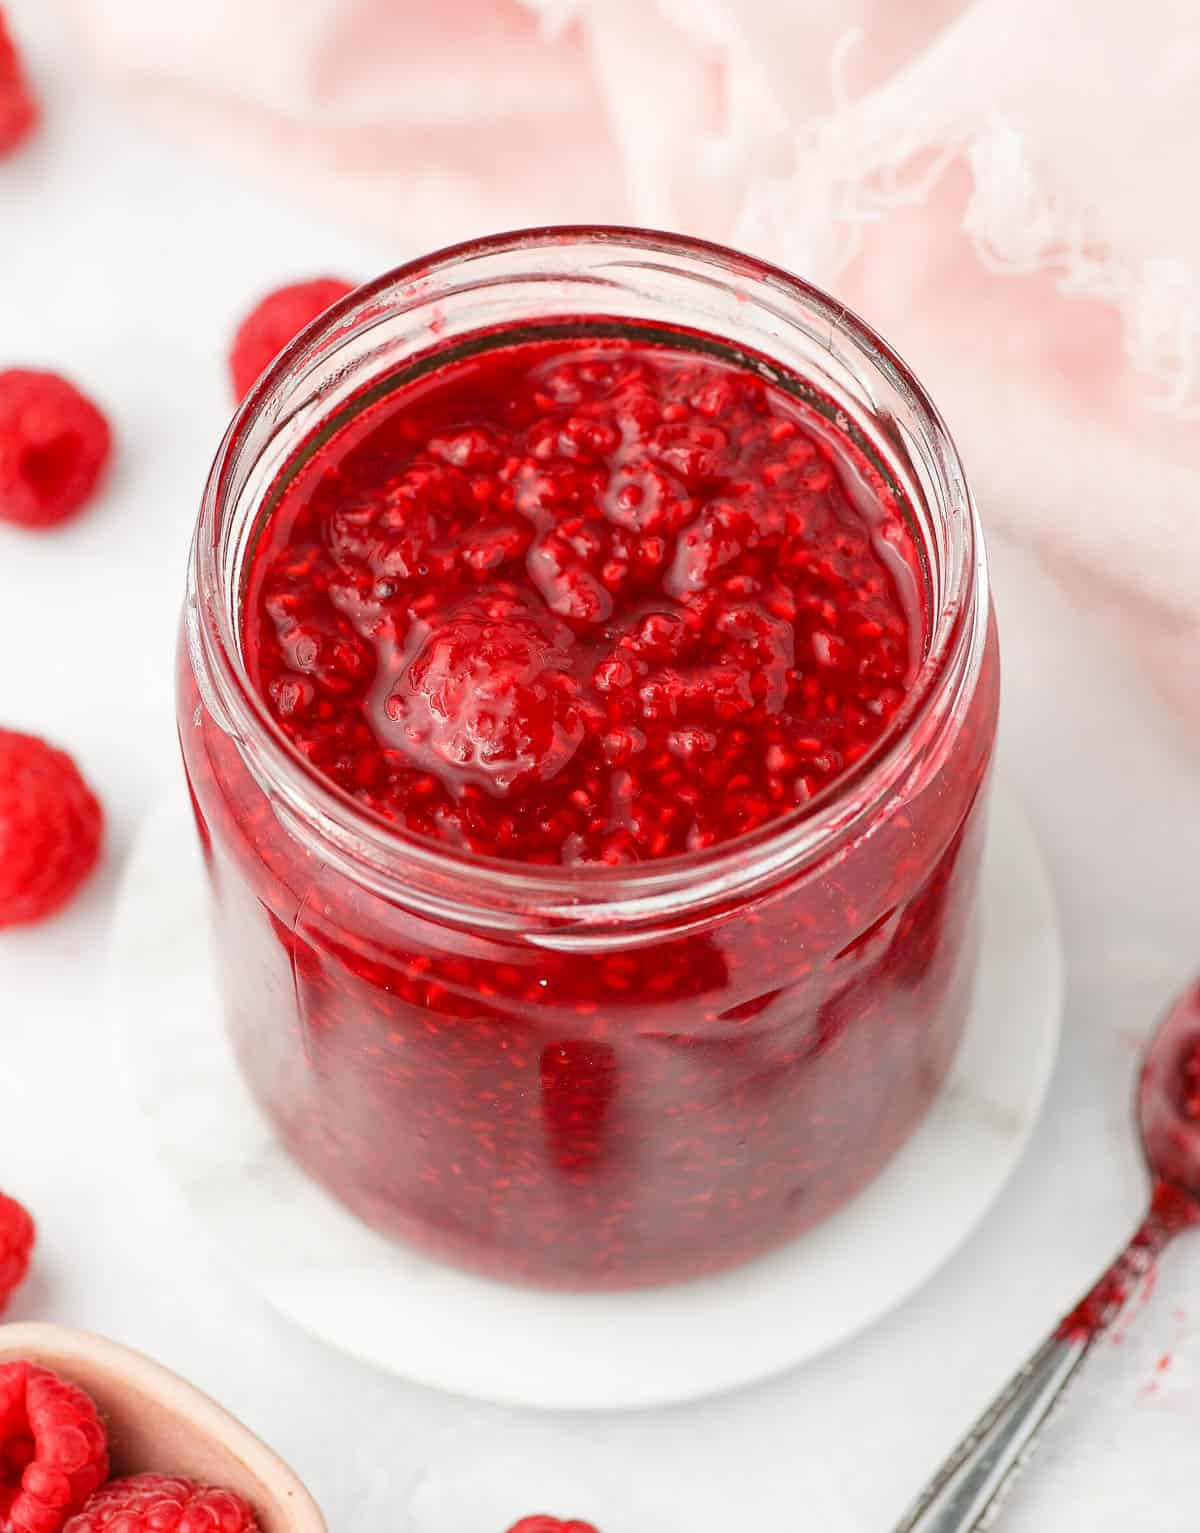 Cooled down compote in a glass jar.